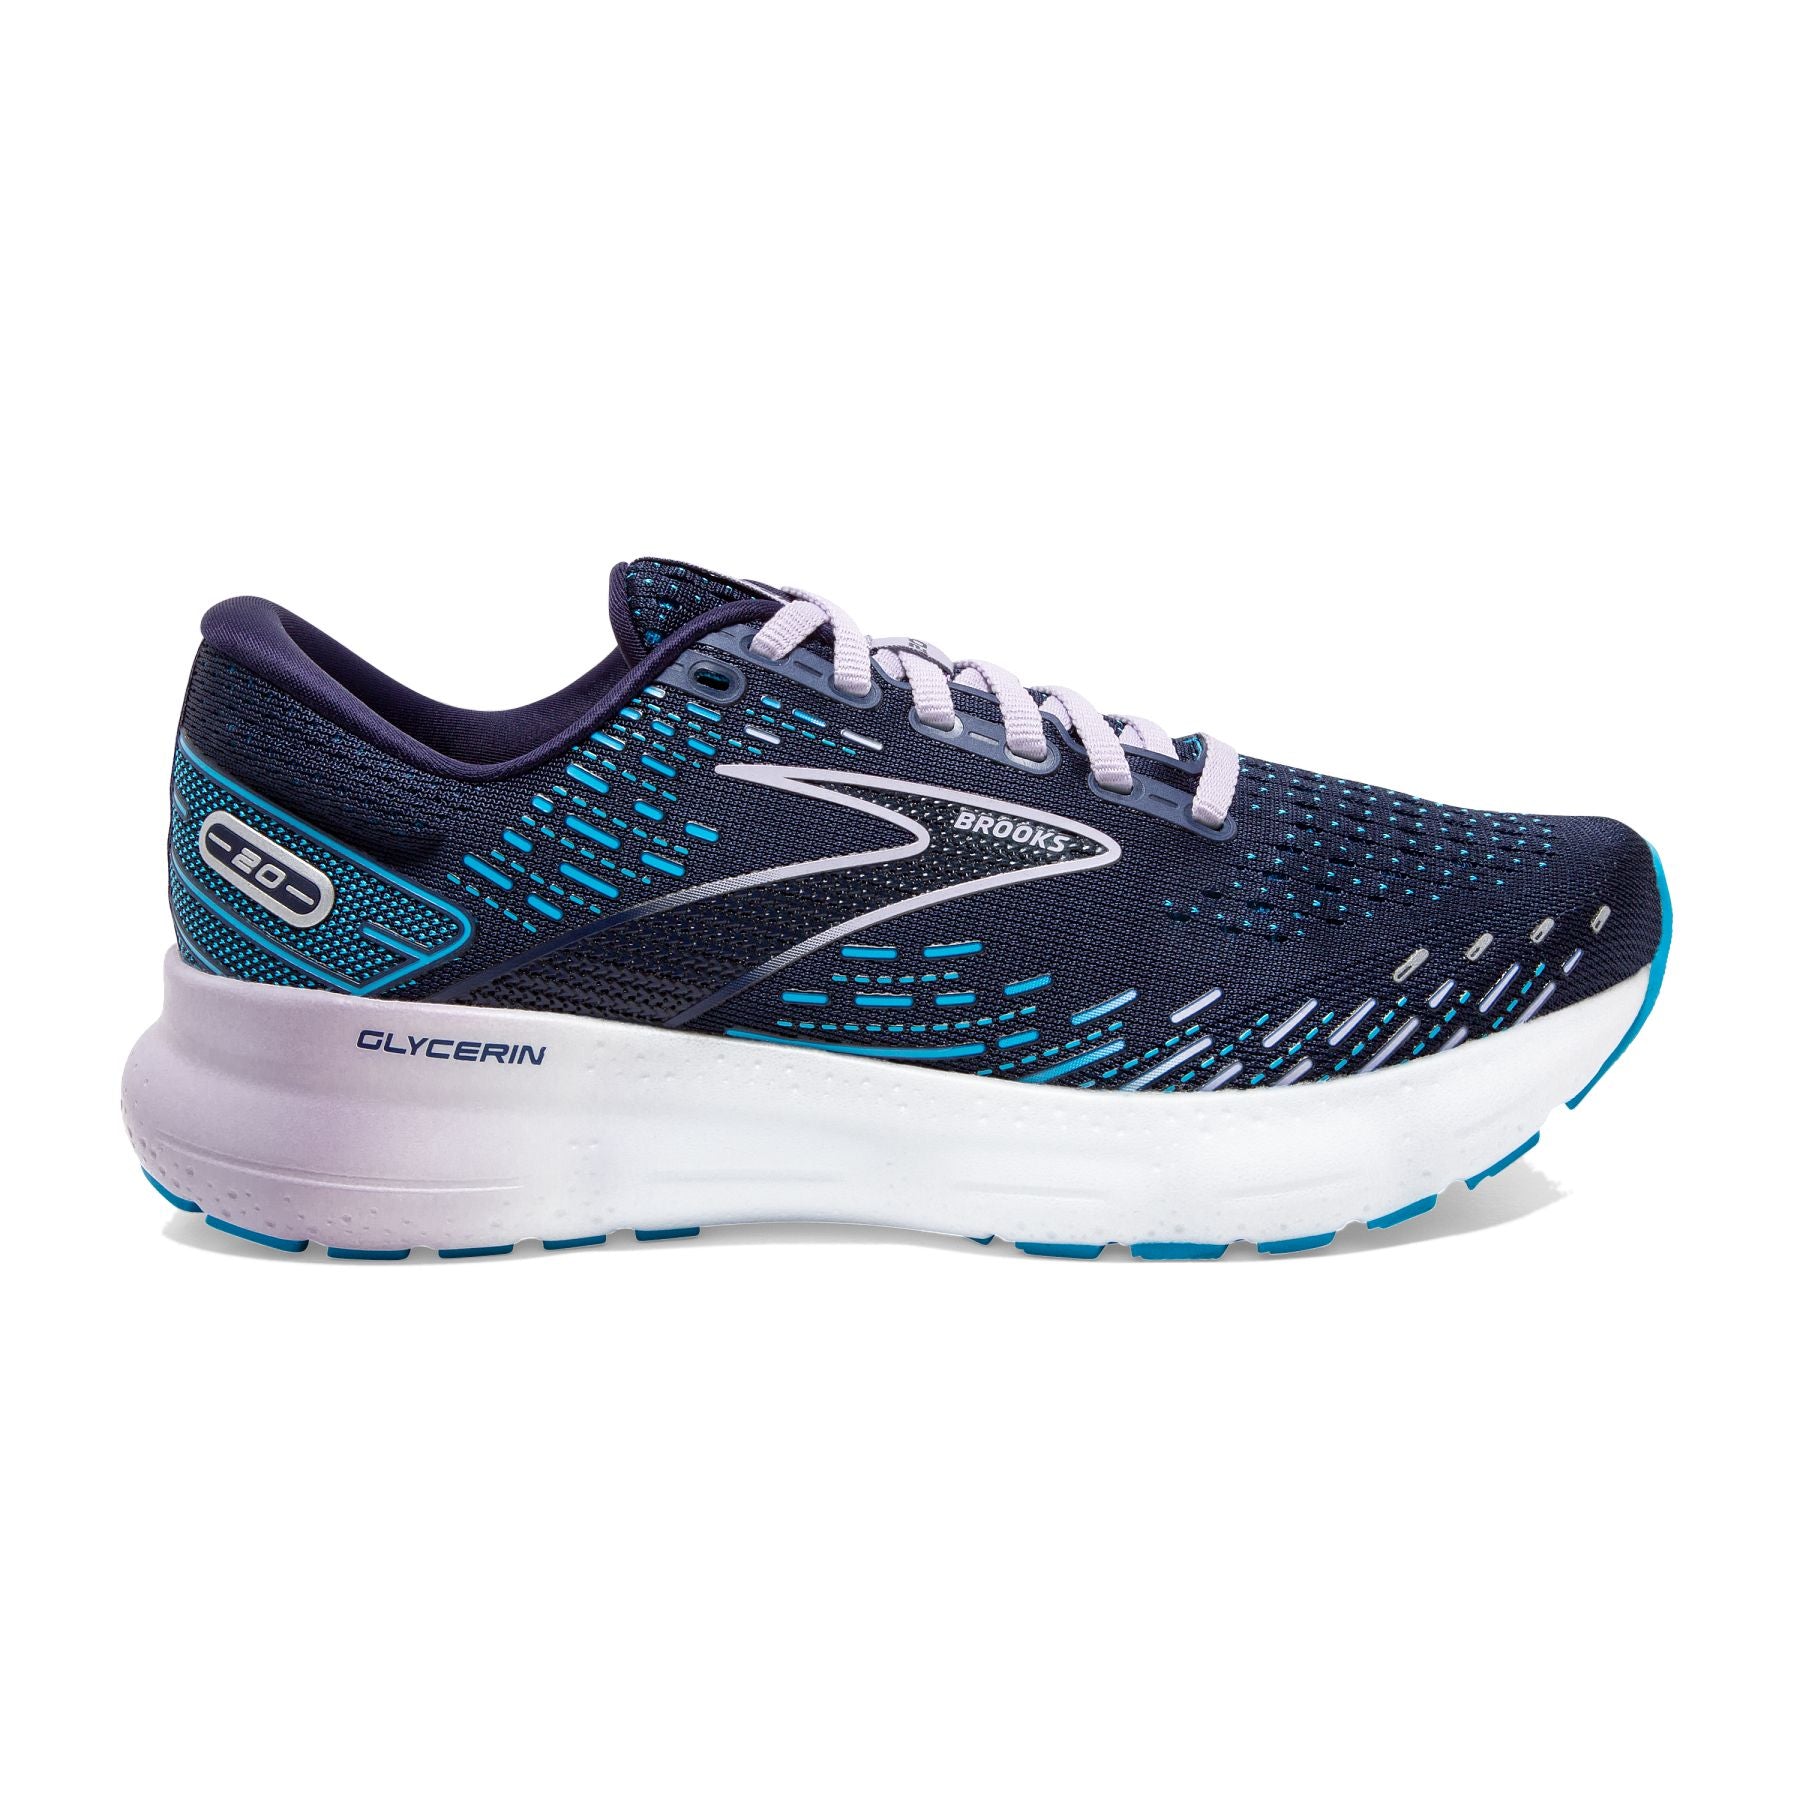 Lateral view of the Brook's Women's Glycerin 20 in the color Peacoat/Ocean/Pastel Lilac